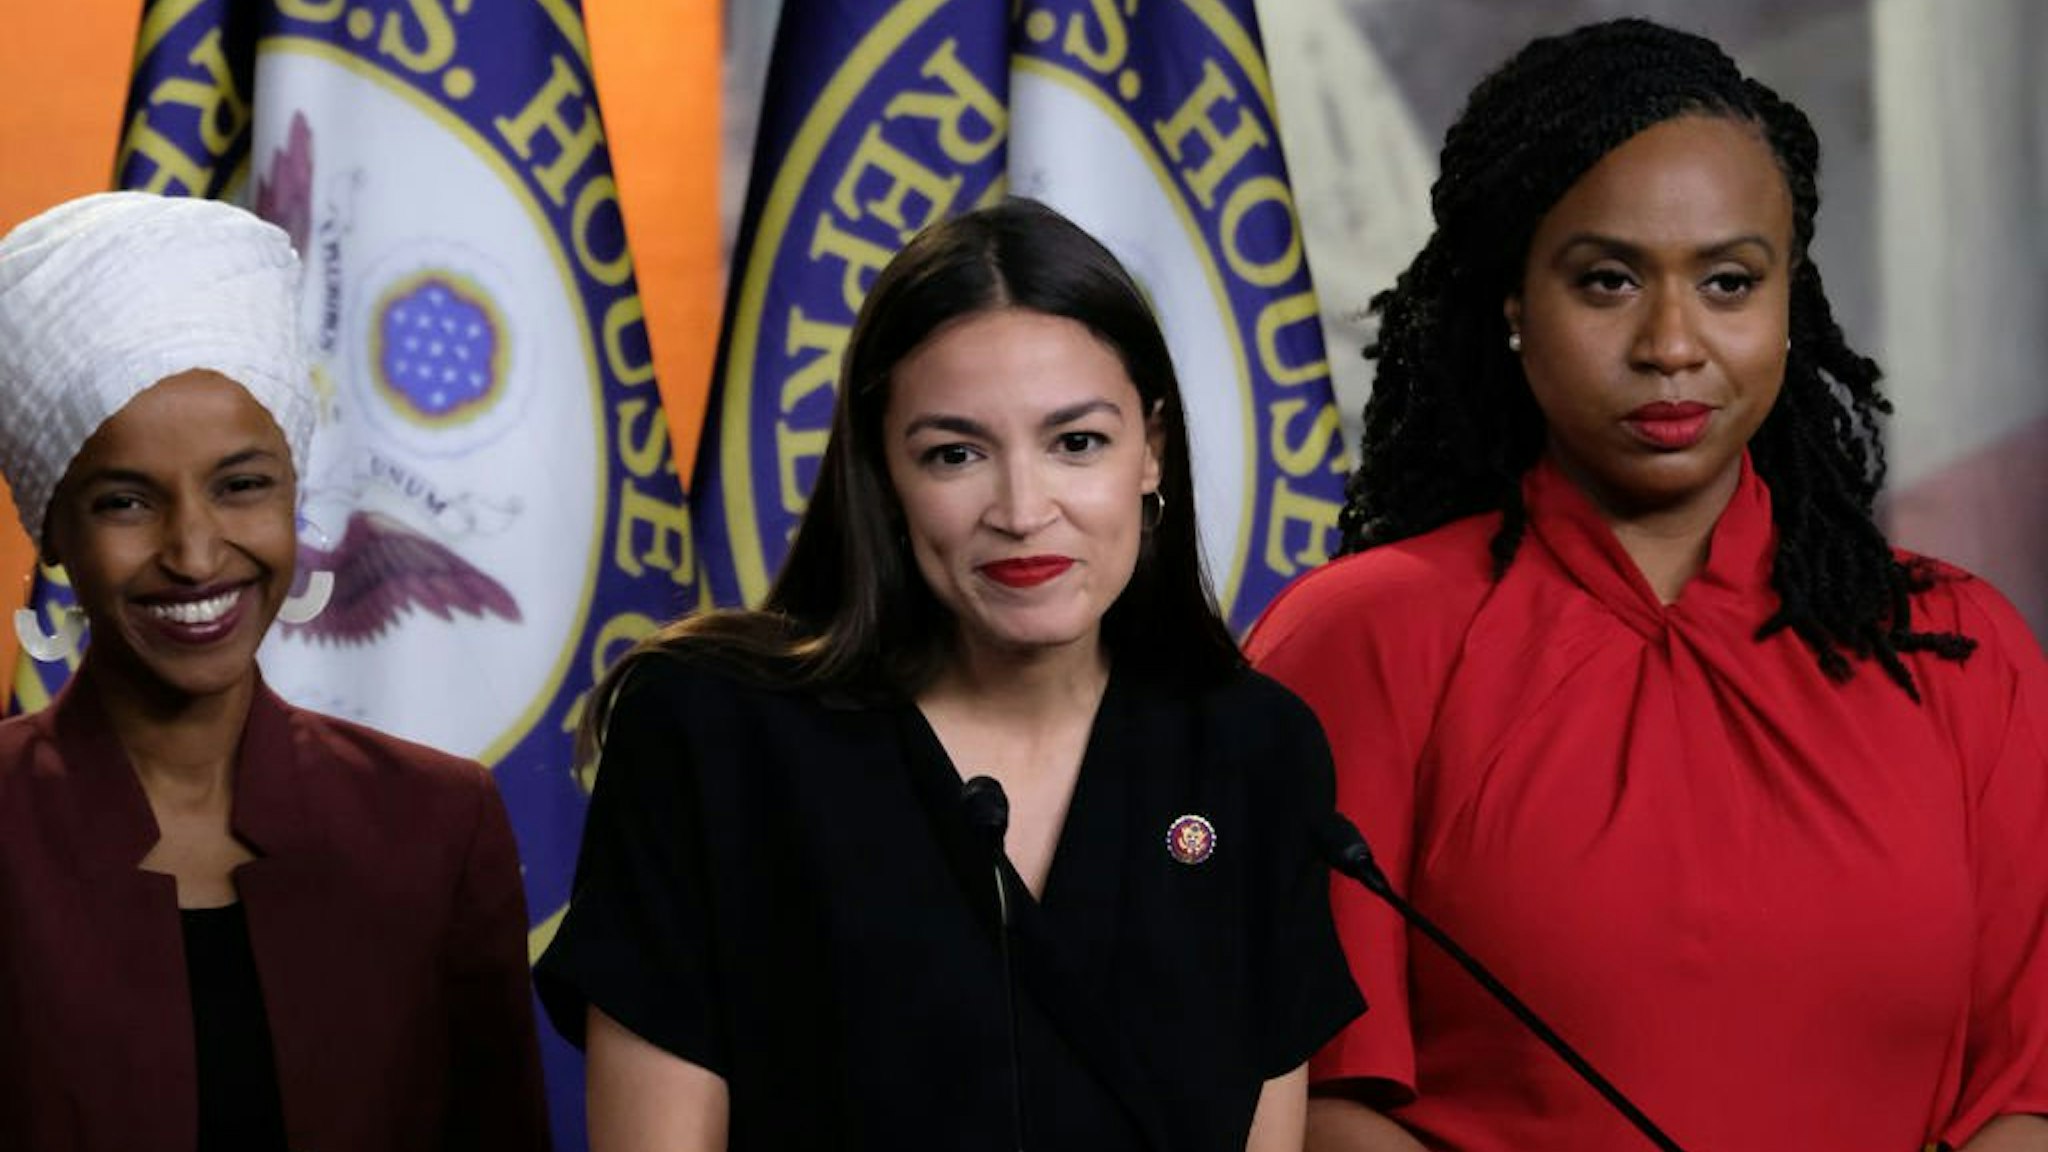 U.S. Rep. Alexandria Ocasio-Cortez (D-NY) pauses while speaking as Reps. Ilhan Omar (D-MN) and Ayanna Pressley (D-MA) listen during a news conference at the U.S. Capitol on July 15, 2019 in Washington, DC.